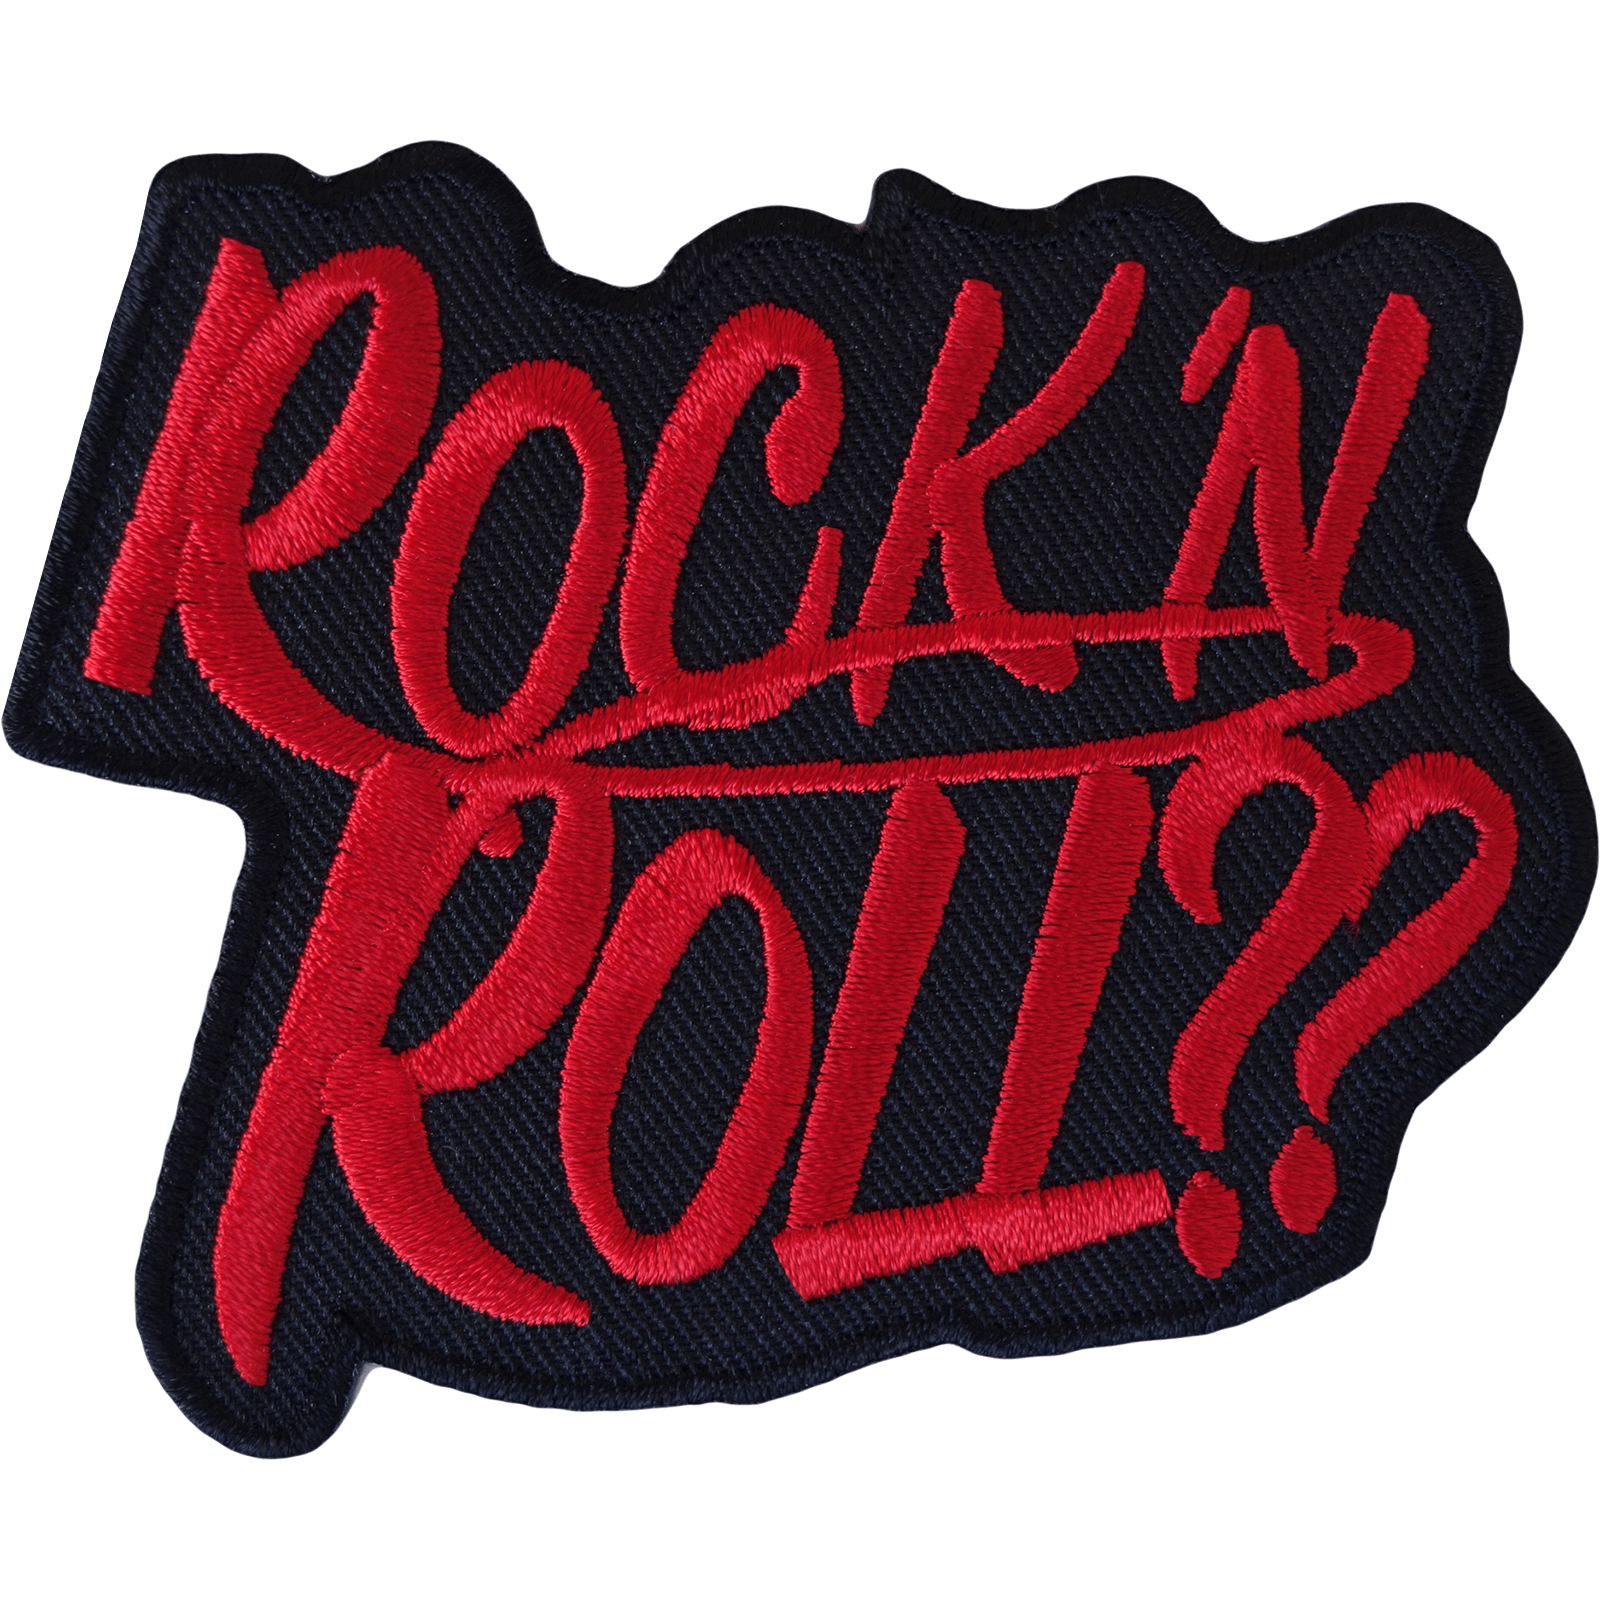 Rock N Roll Iron On Patch And Sew On T Shirt Clothes Bag Music Embroidered Badge